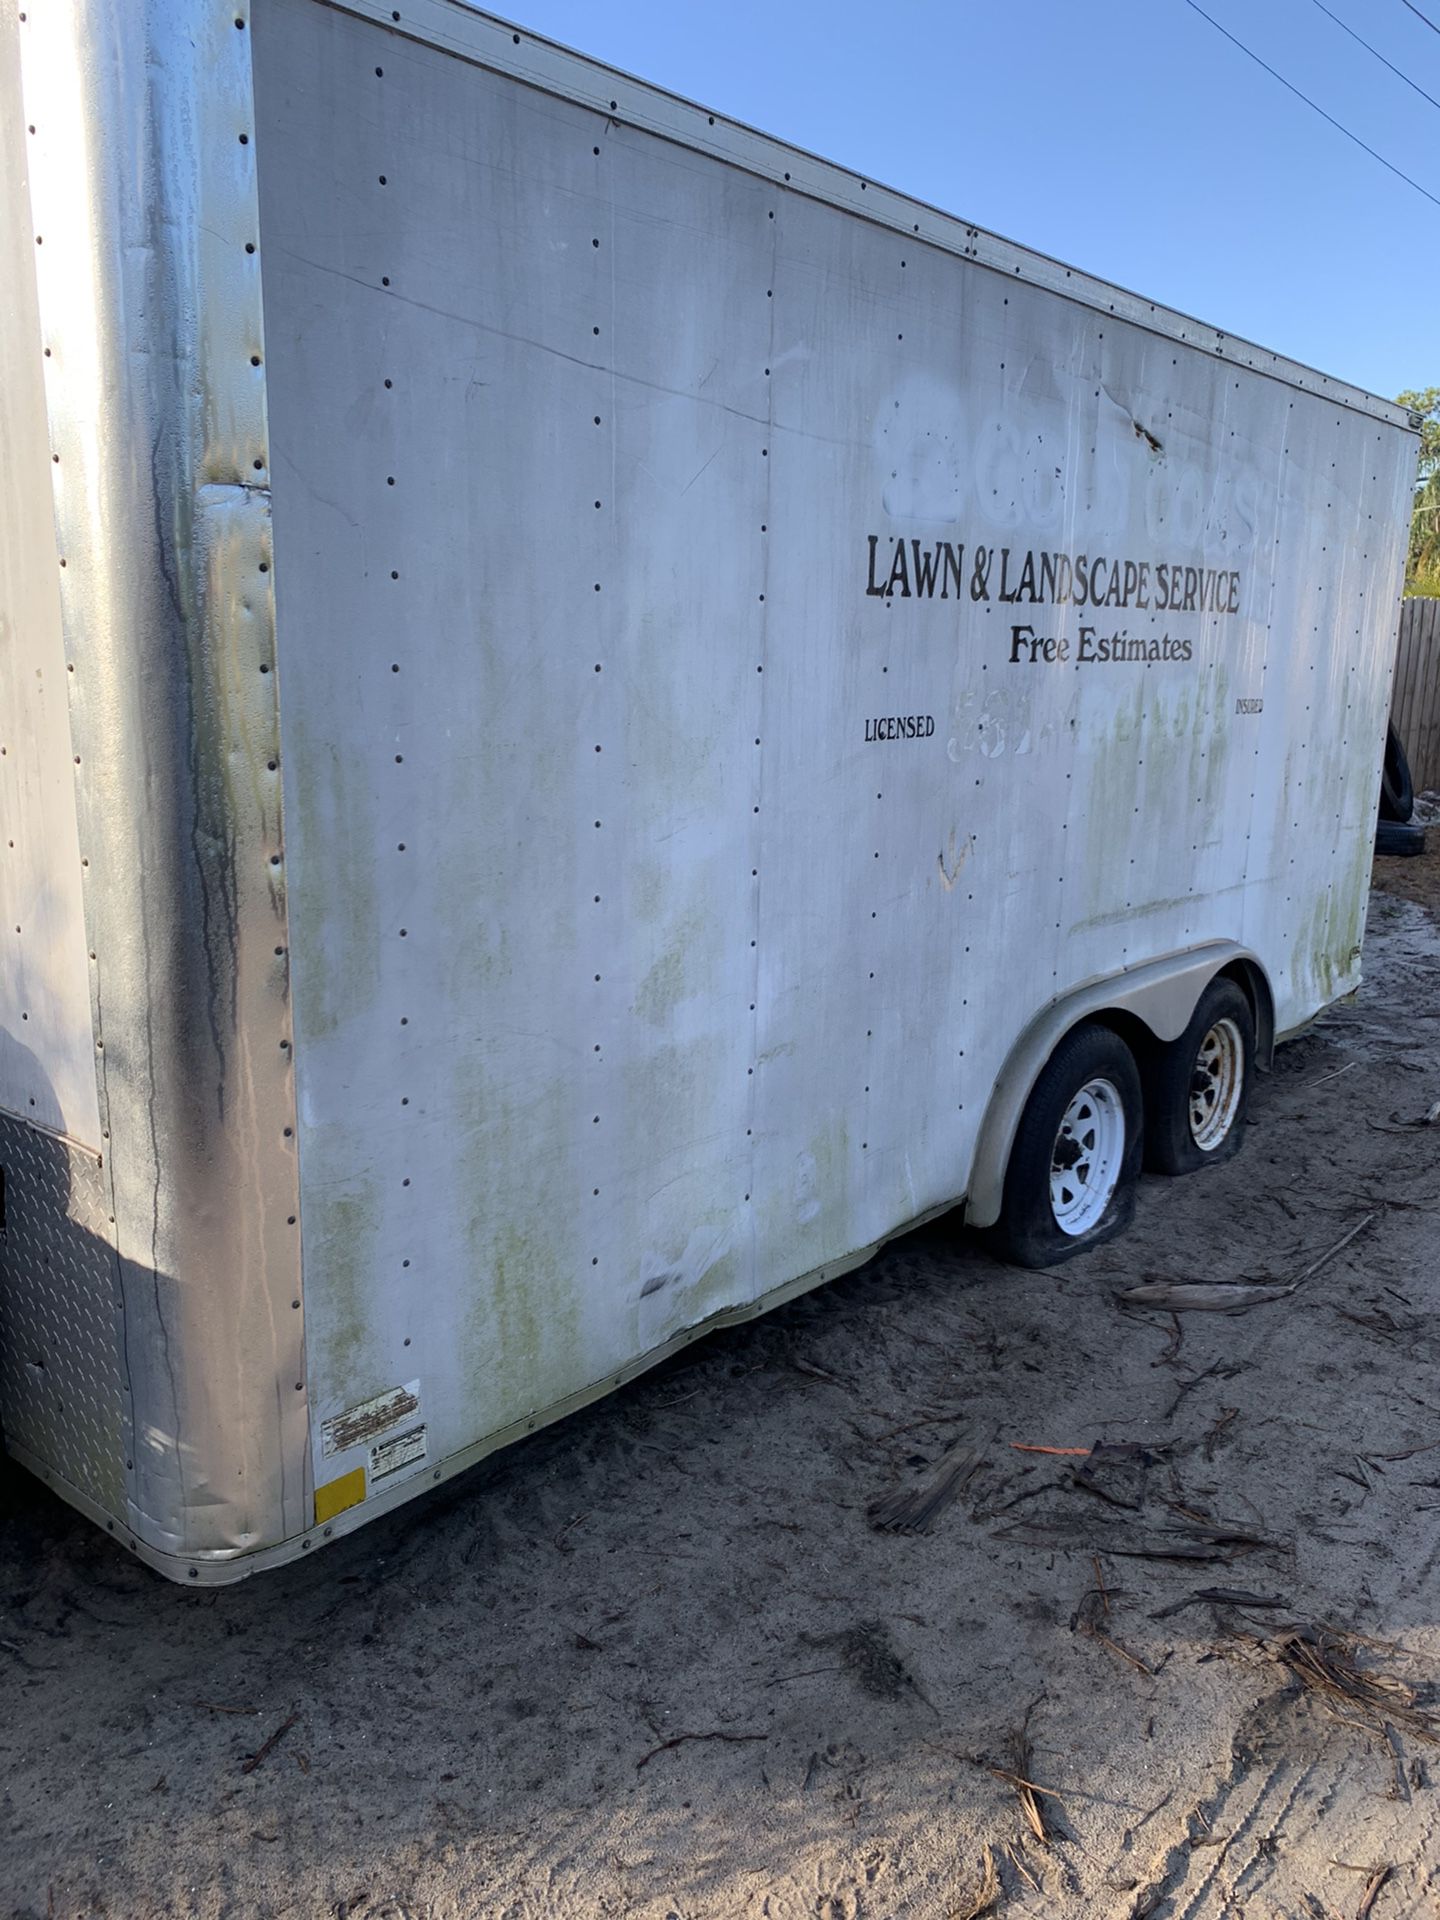 16 x 7 1/2 landscaping trailer or storage